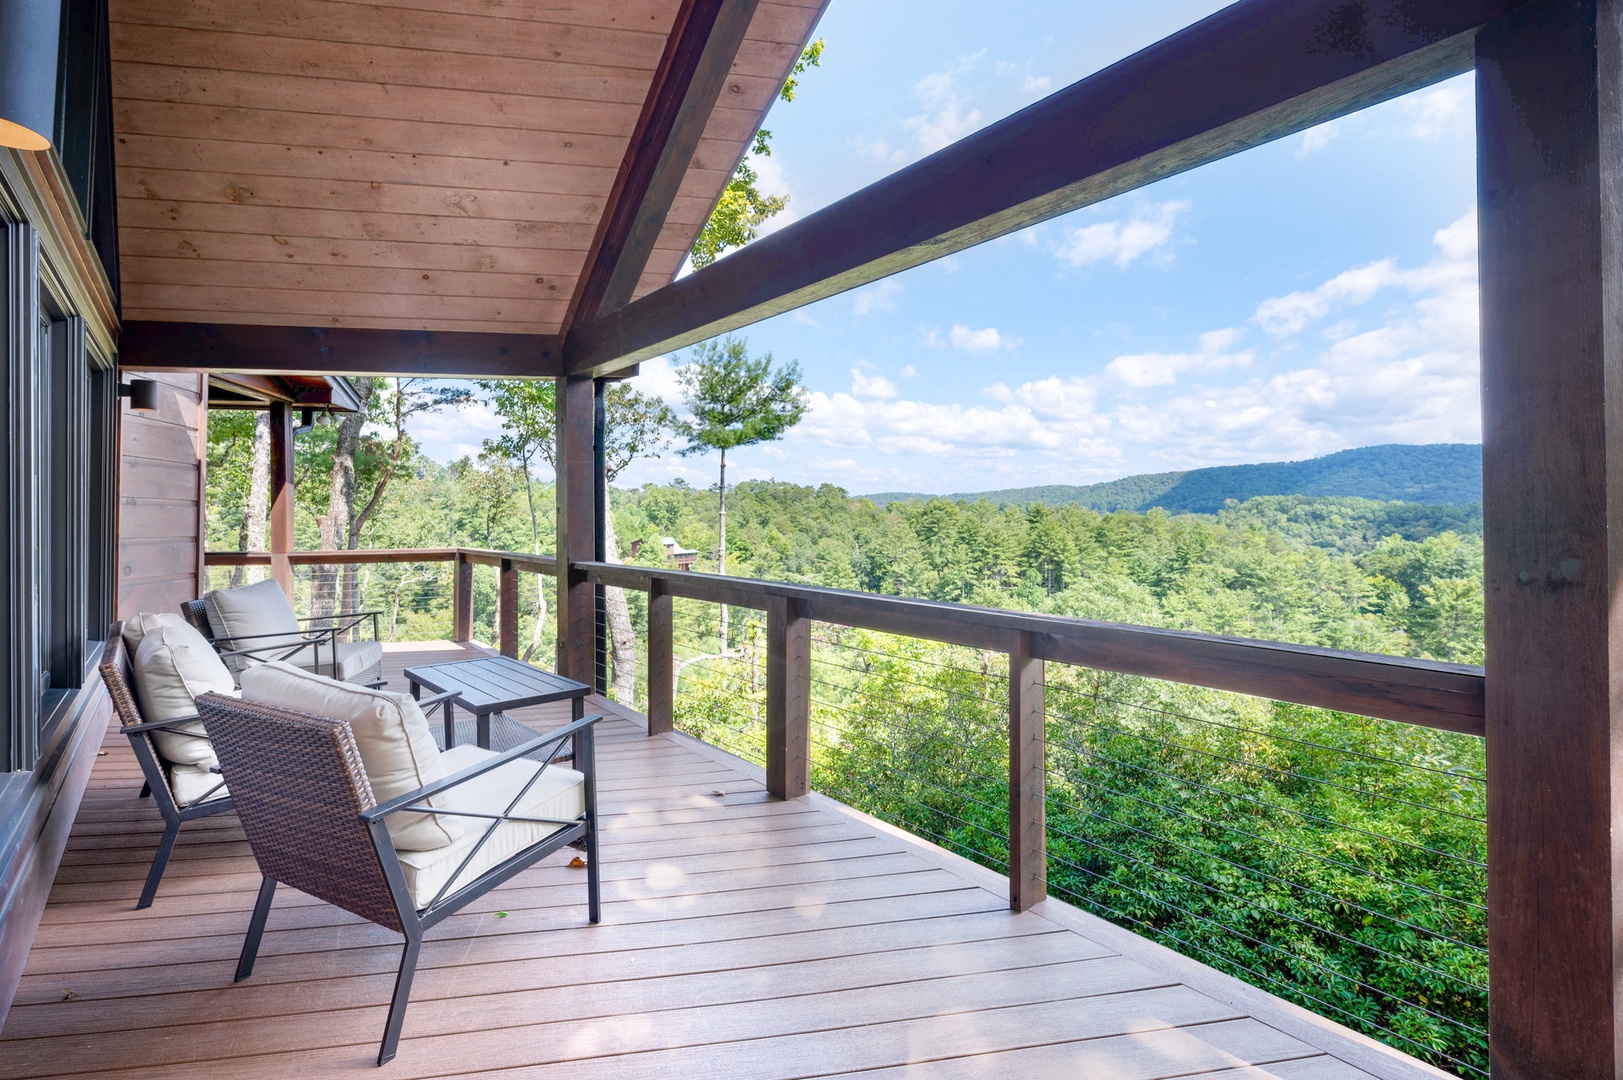 Kricket's Overlook- Mountain views with outdoor seating on the deck